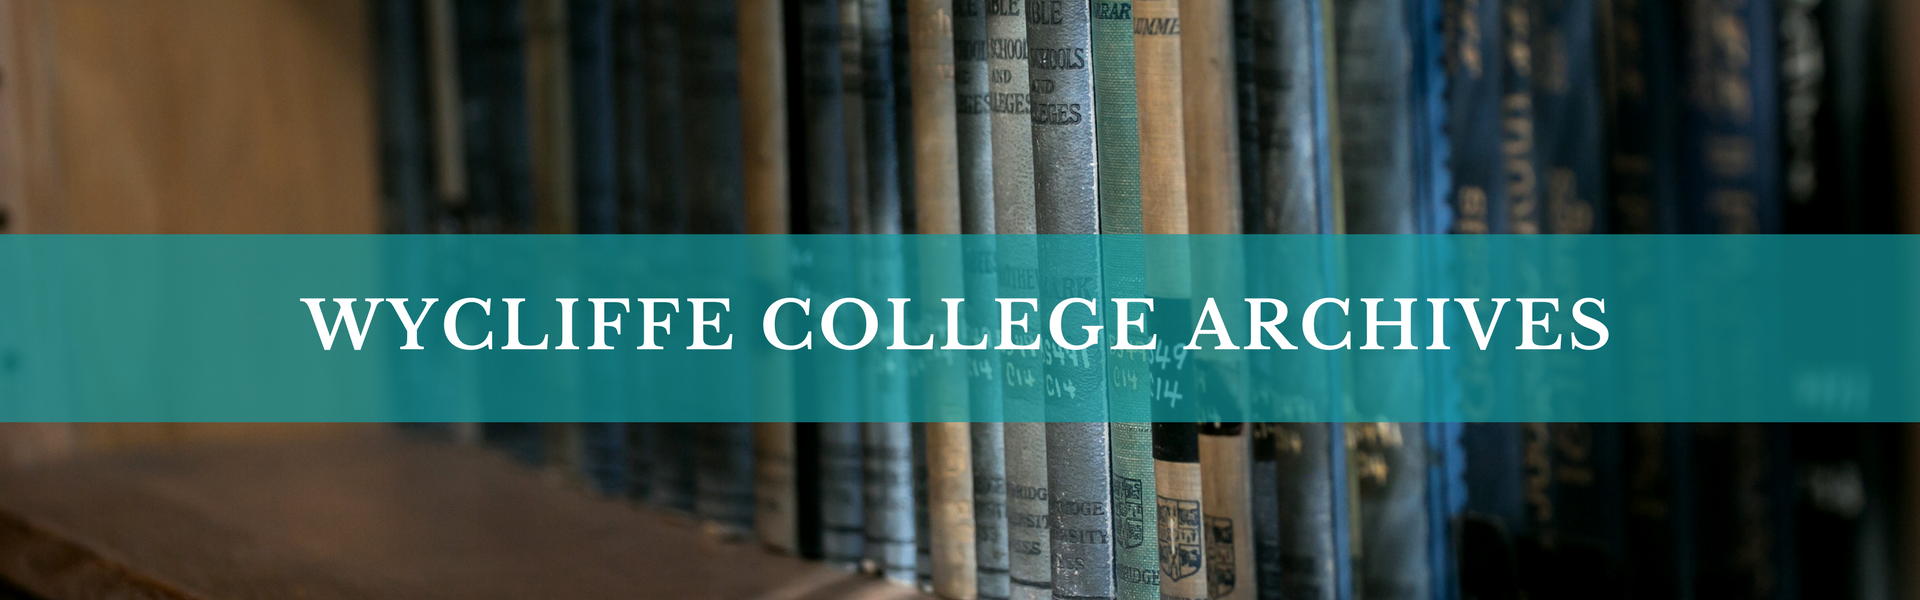 Wycliffe College Archives